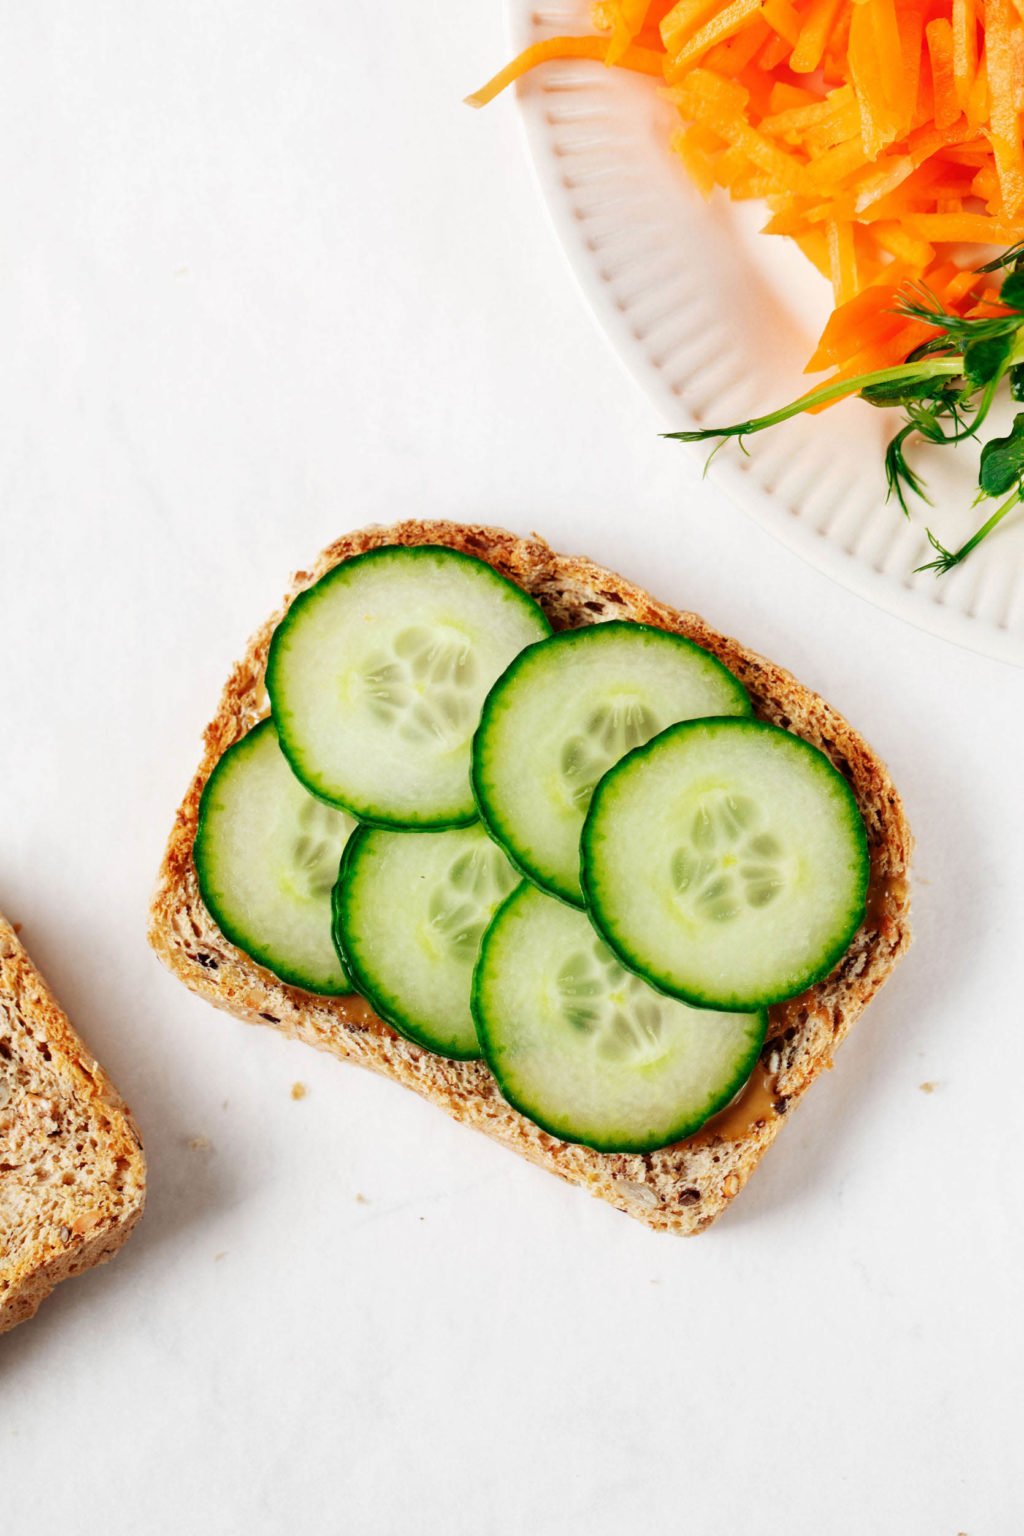 Two slices of whole grain sandwich bread are being assembled into a vegetable sandwich. They rest on a white surface.